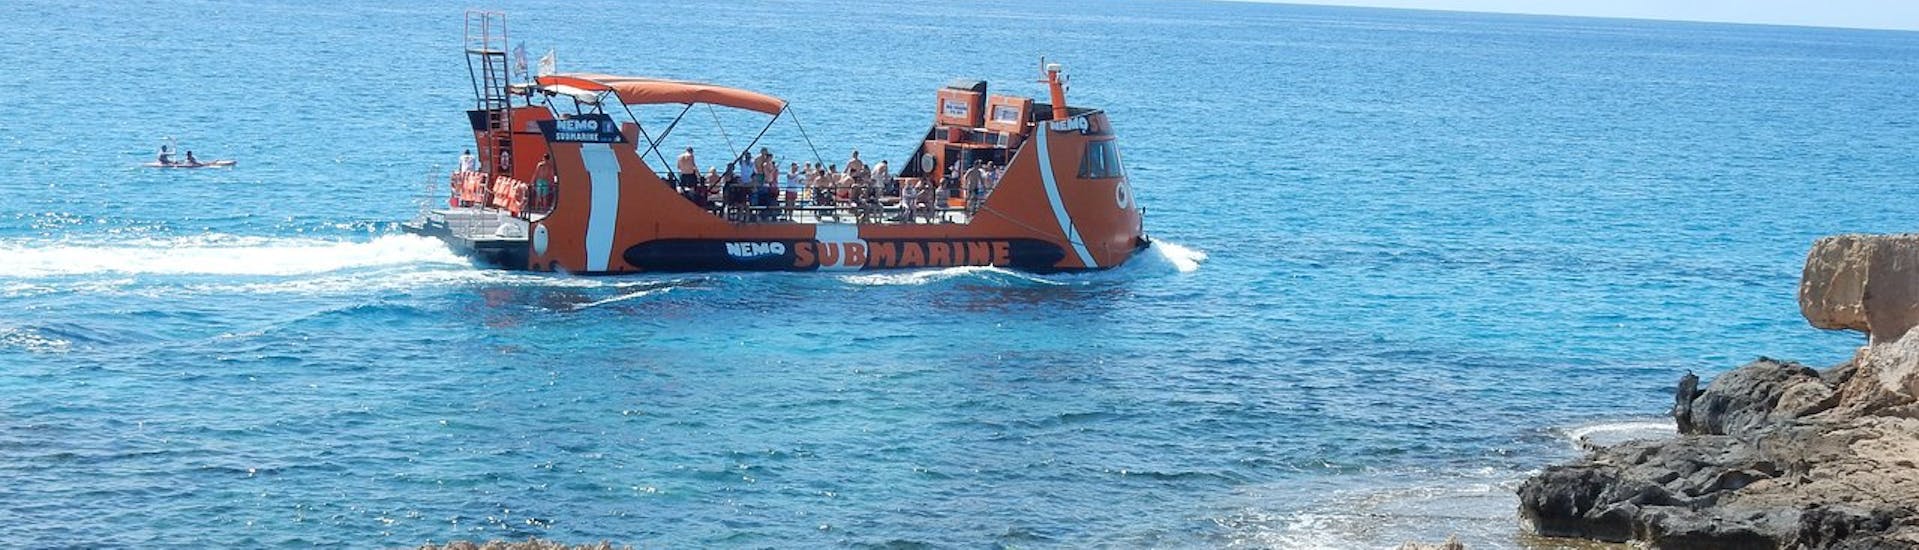 The boat seen from a cave during its trip along the coast of Ayia Napa with Nemo Submarine.